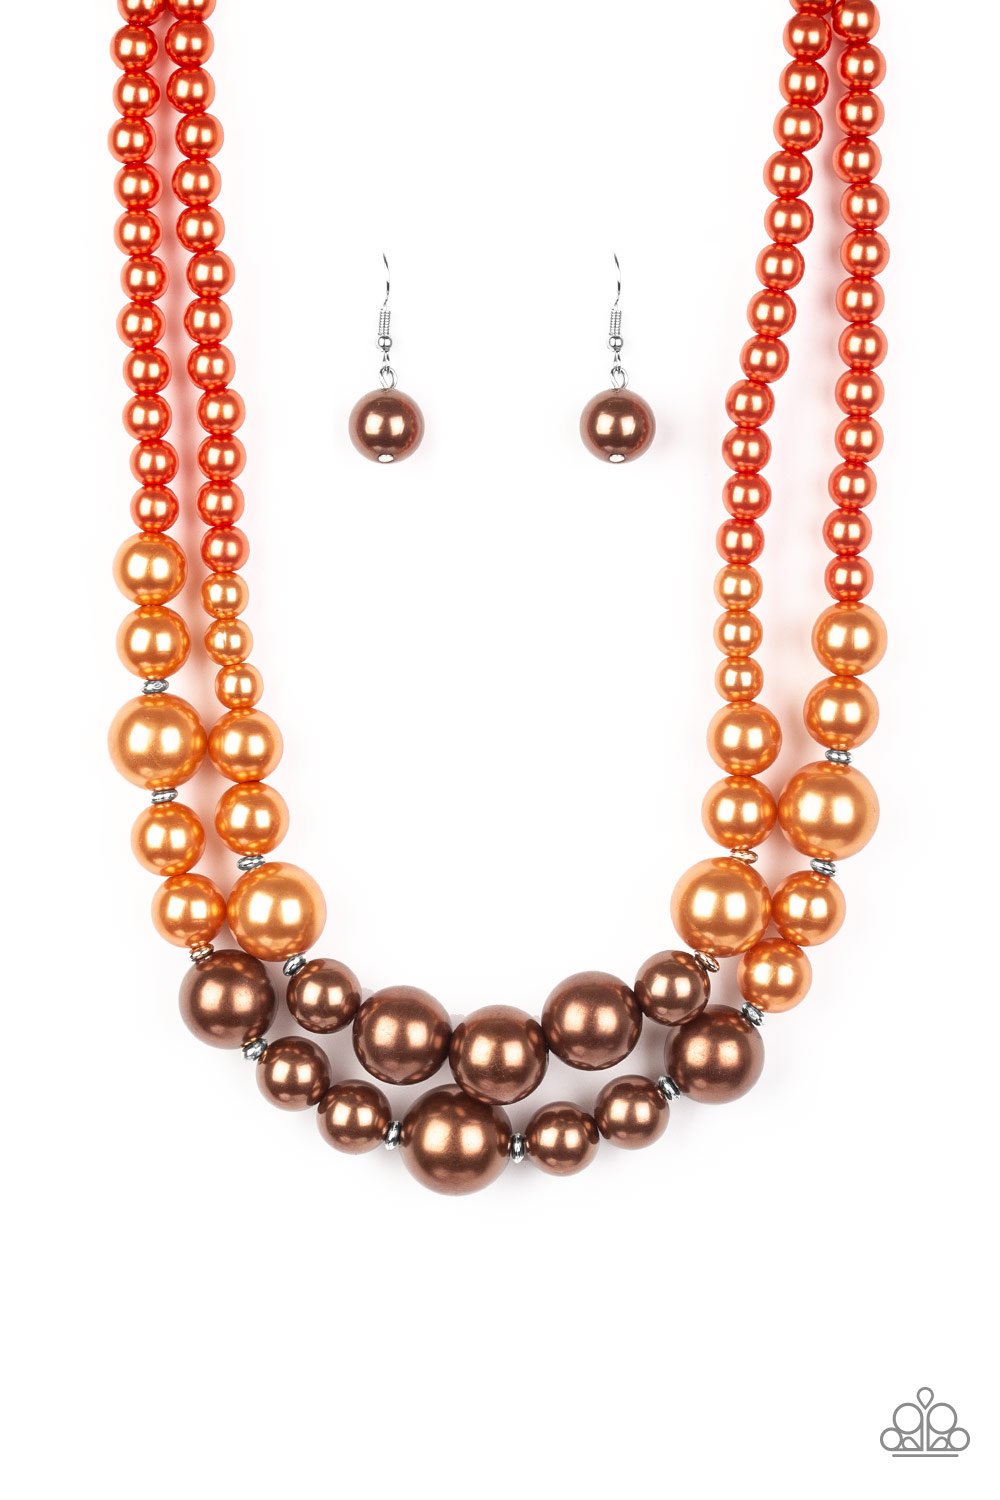 The More The Modest Multi (Pearls) Necklace freeshipping - JewLz4u Gemstone Gallery